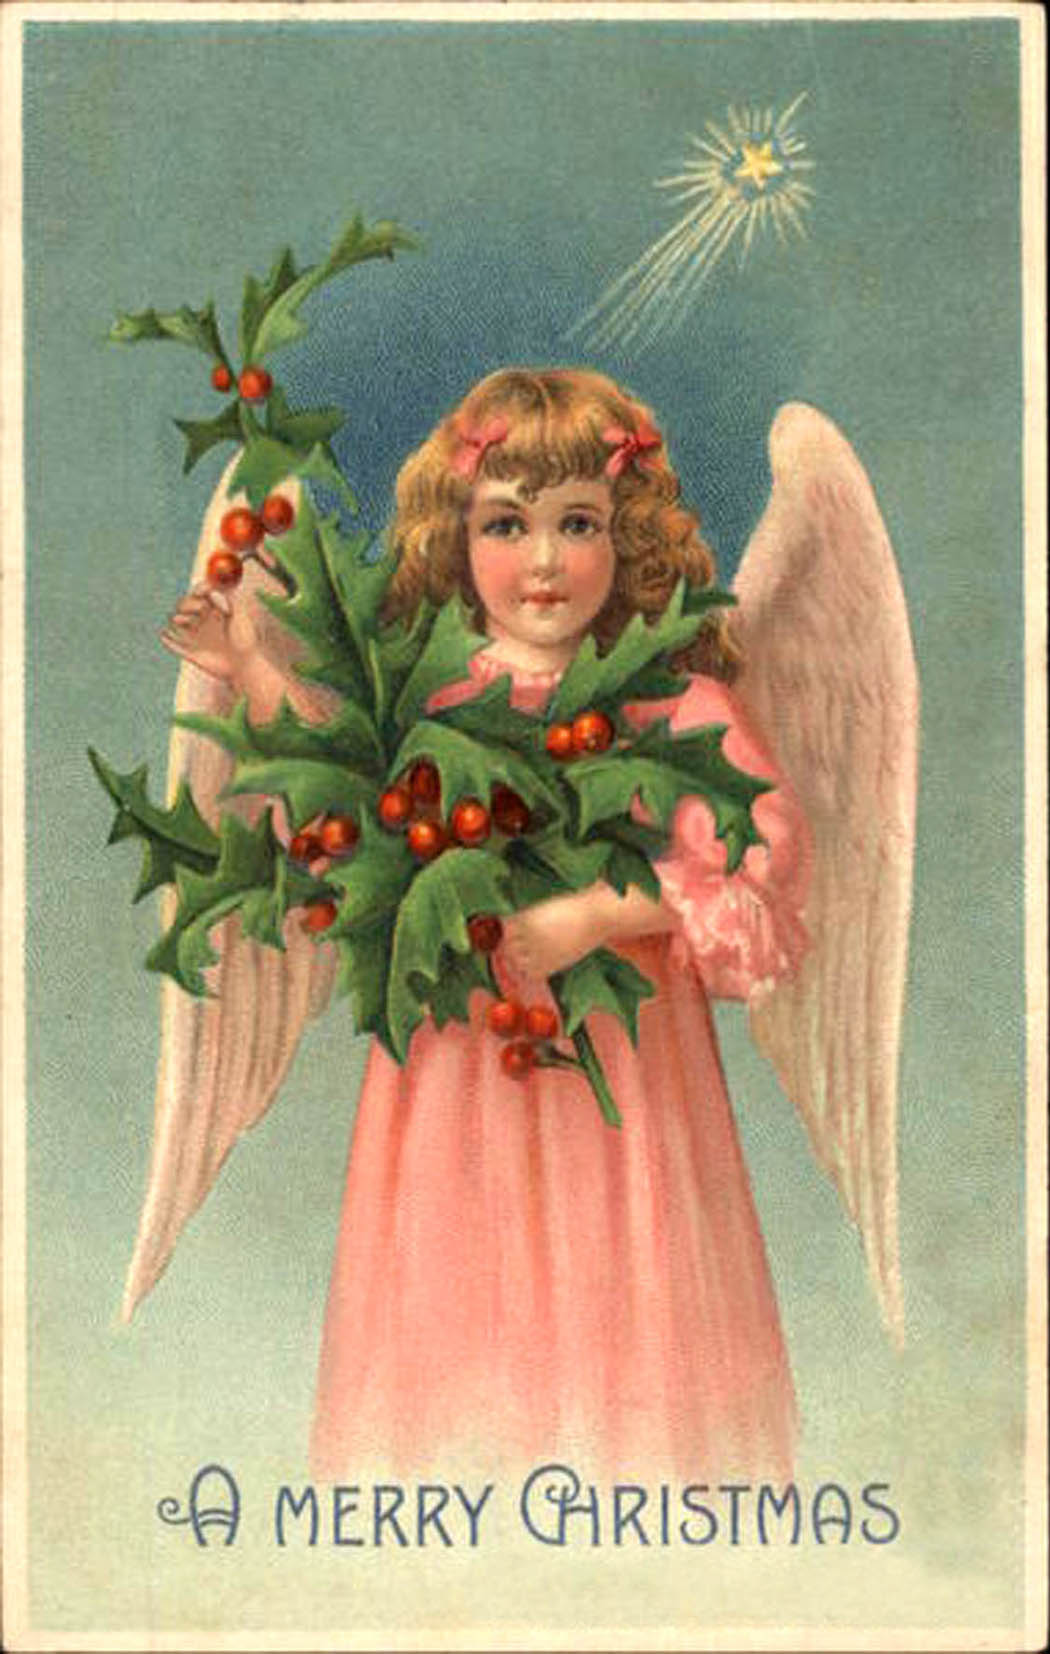 Card of an angel girl in pink dress holding a holly branch and star shining down from above